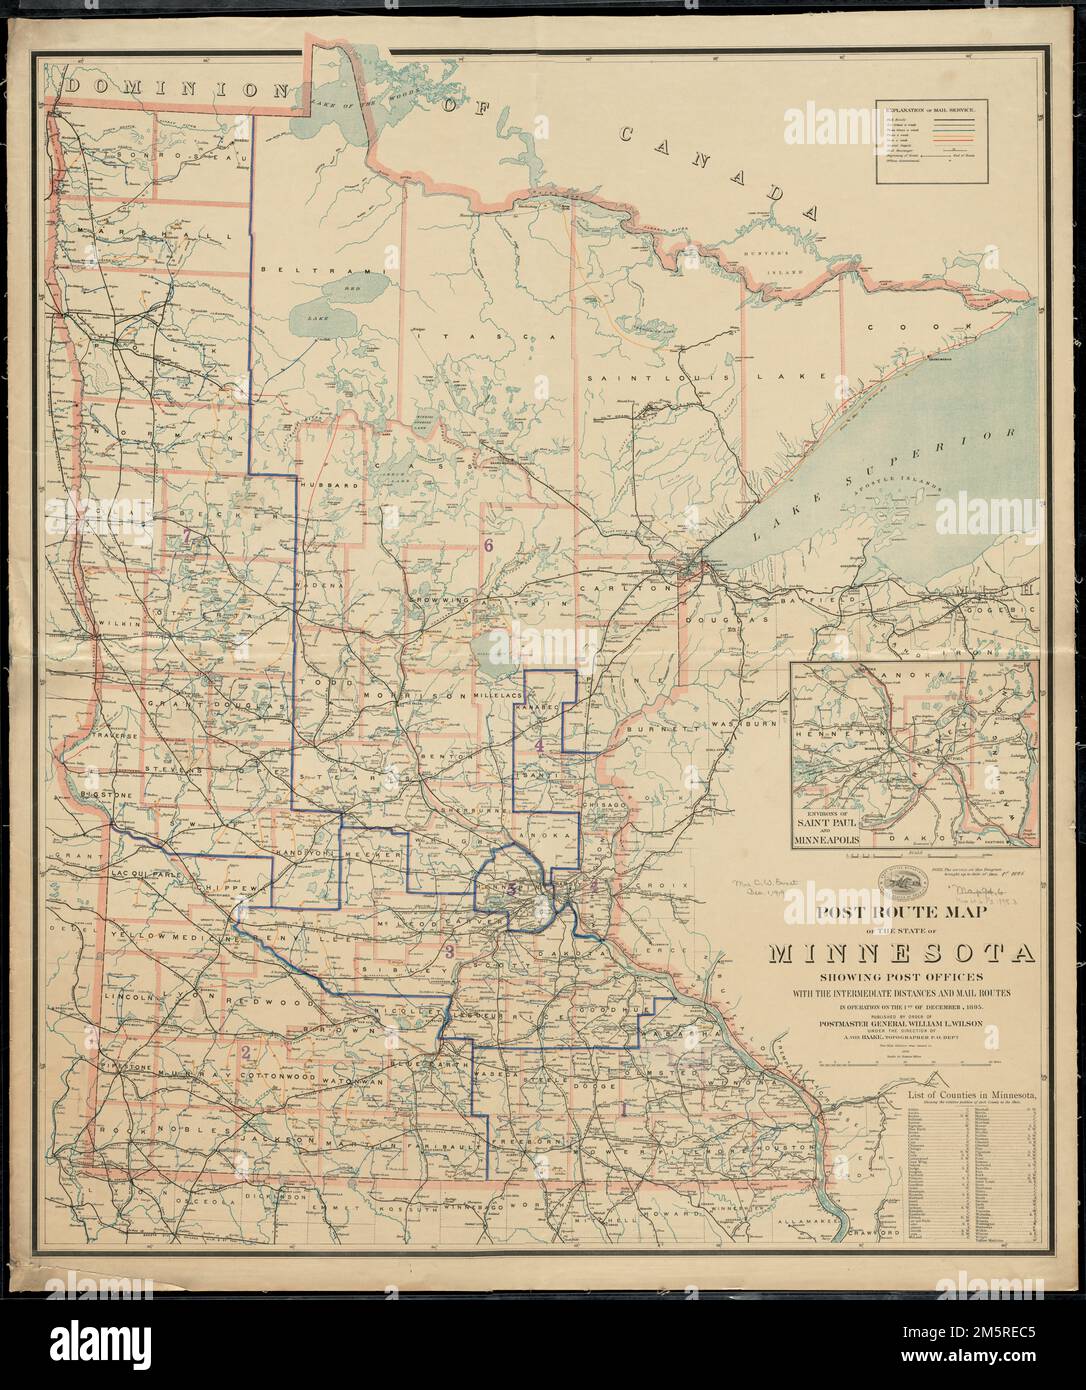 150 St Paul Minnesota Map Stock Photos, High-Res Pictures, and